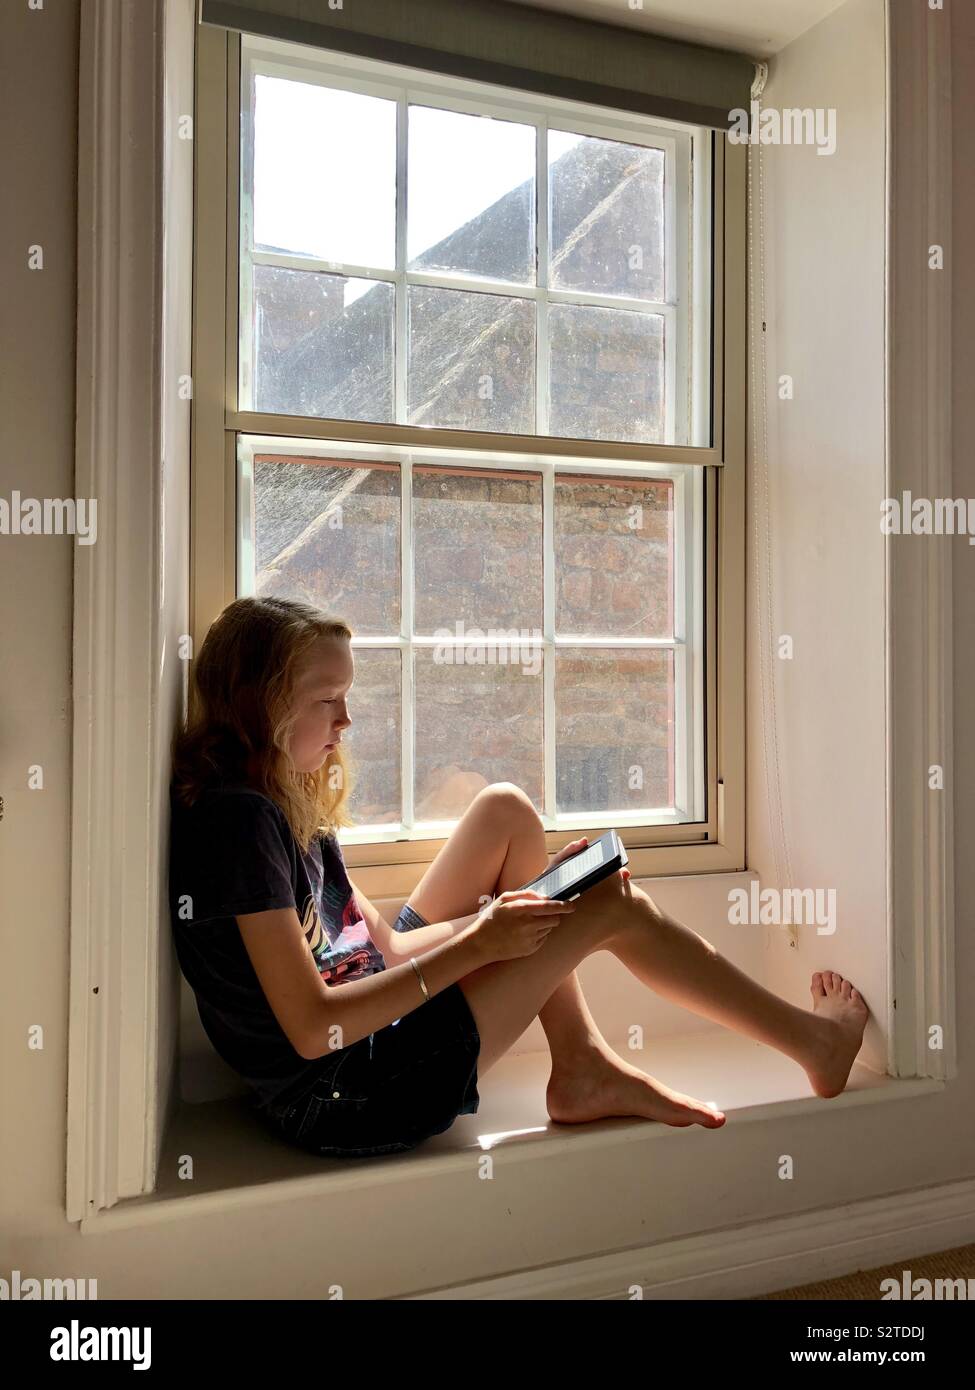 Girl reading a book on a wooden window seat Stock Photo